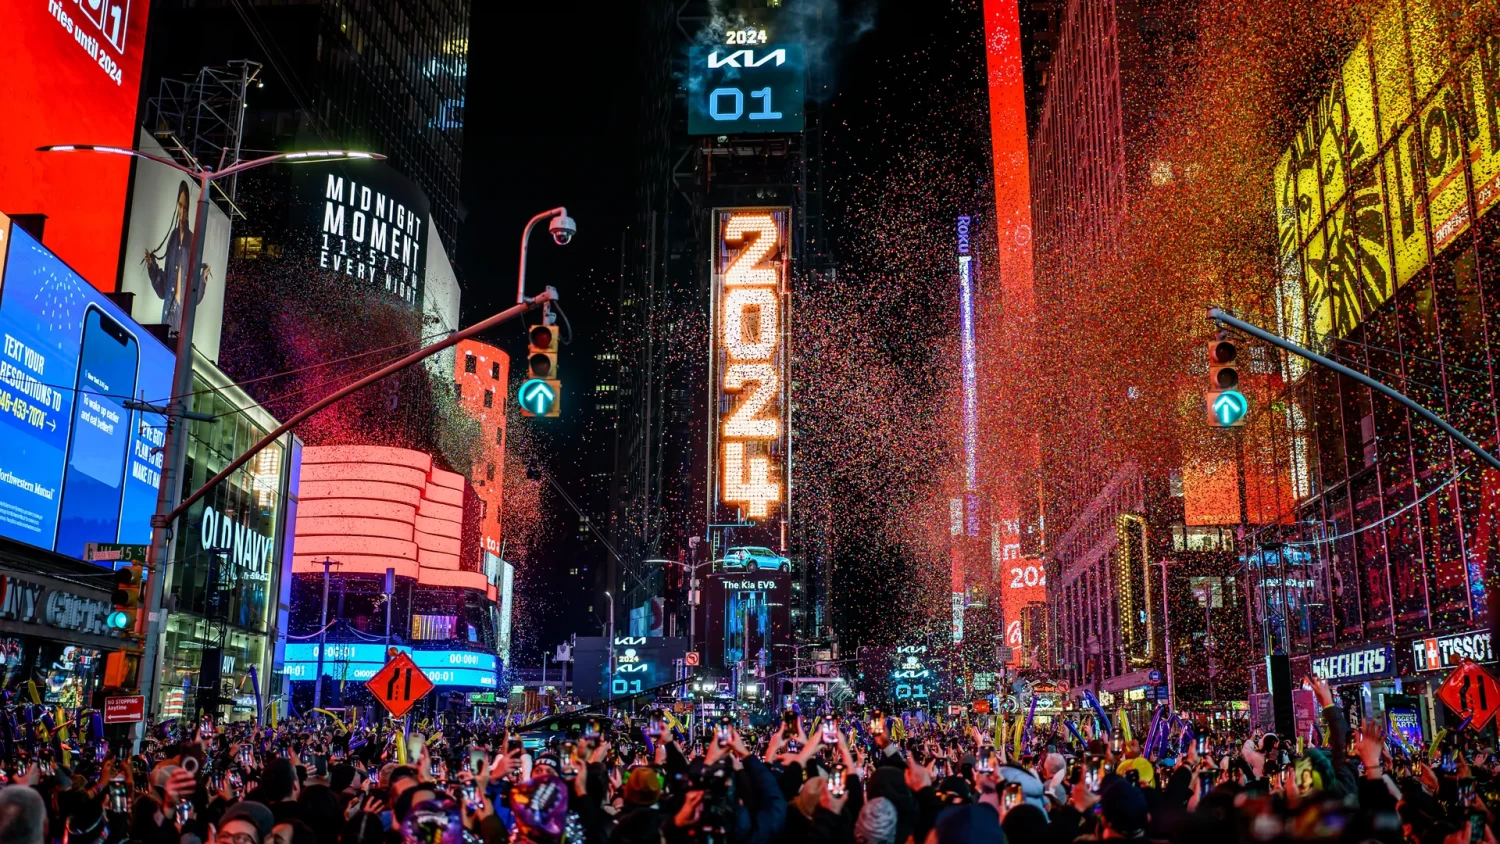 Confetti fills the sky as the countdown to the new year is marked by the Ball Drop and fireworks during the Times Square New Year's Eve 2024 Celebration in New York City on Sunday. Photo: Roy Rochlin/WireImage